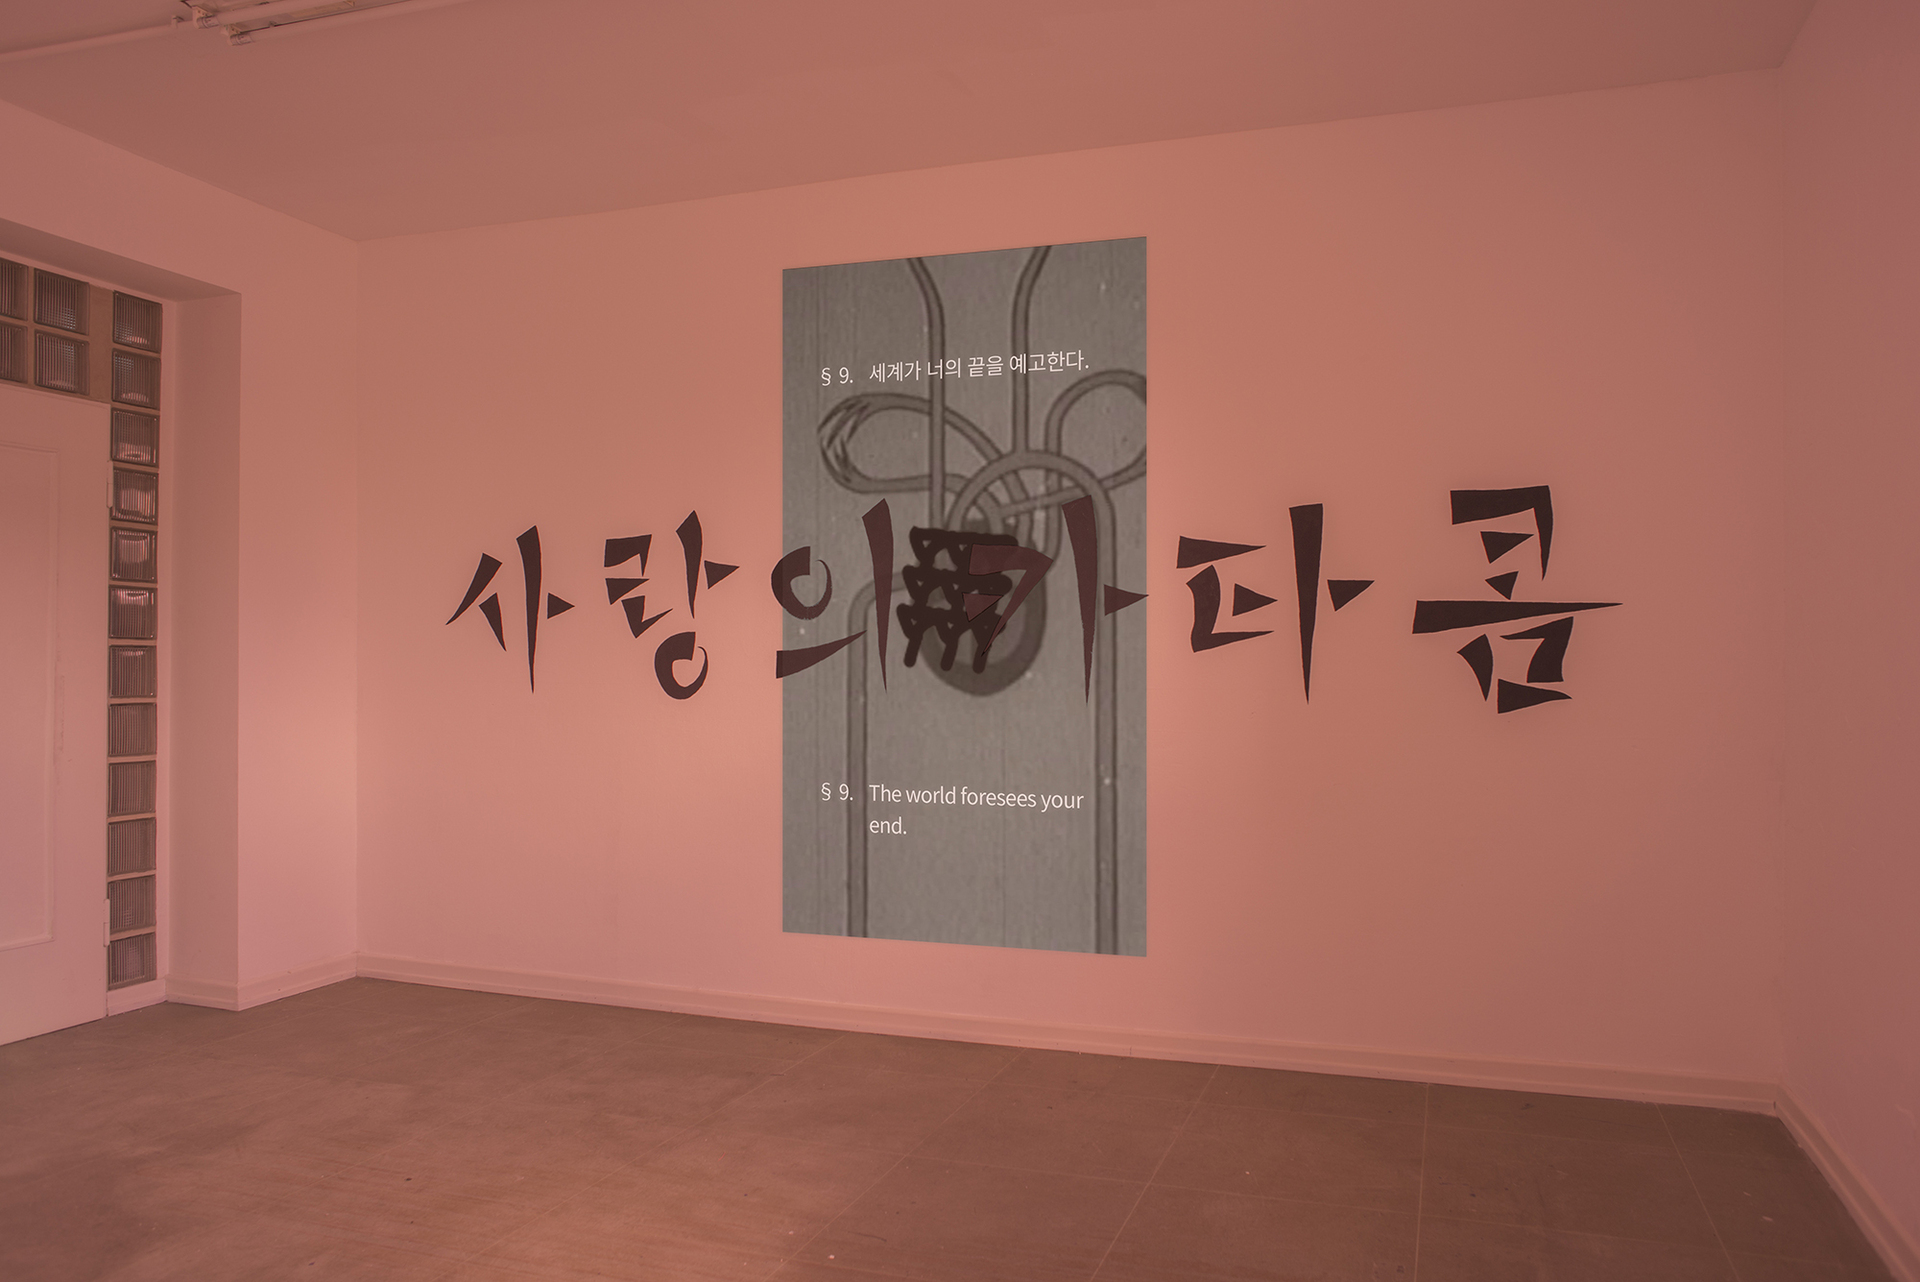 Sylbee Kim: Catacombs of Love, 2020 Wall painting, 66 x 400 cm / A Sexagesimal Love Letter, 2016 HD, 9:16, color, sound, 6’18” Original signal production Hyoungjin Kim, MÉLANGE 2020.